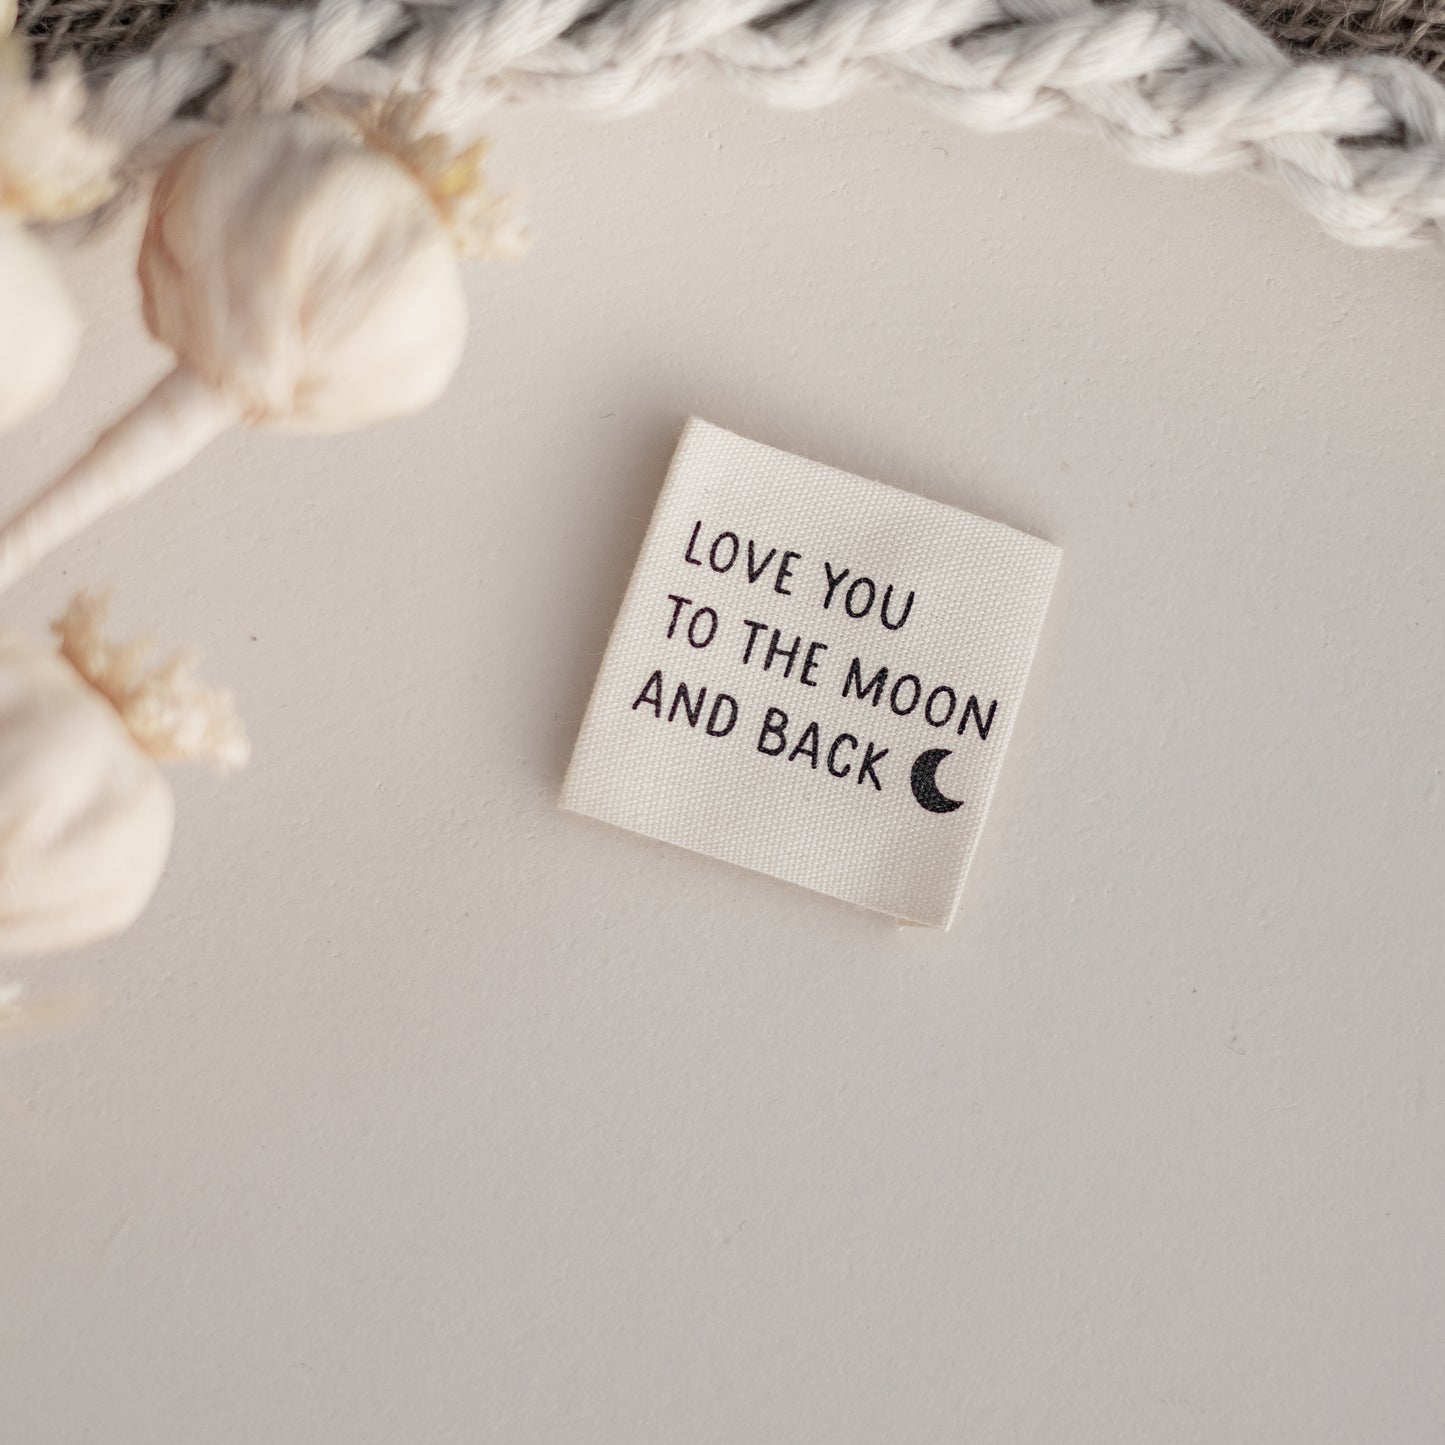 1 Set (5 Stück) Baumwolllabel Love you to the moon and back 1600-0017 25-2.3